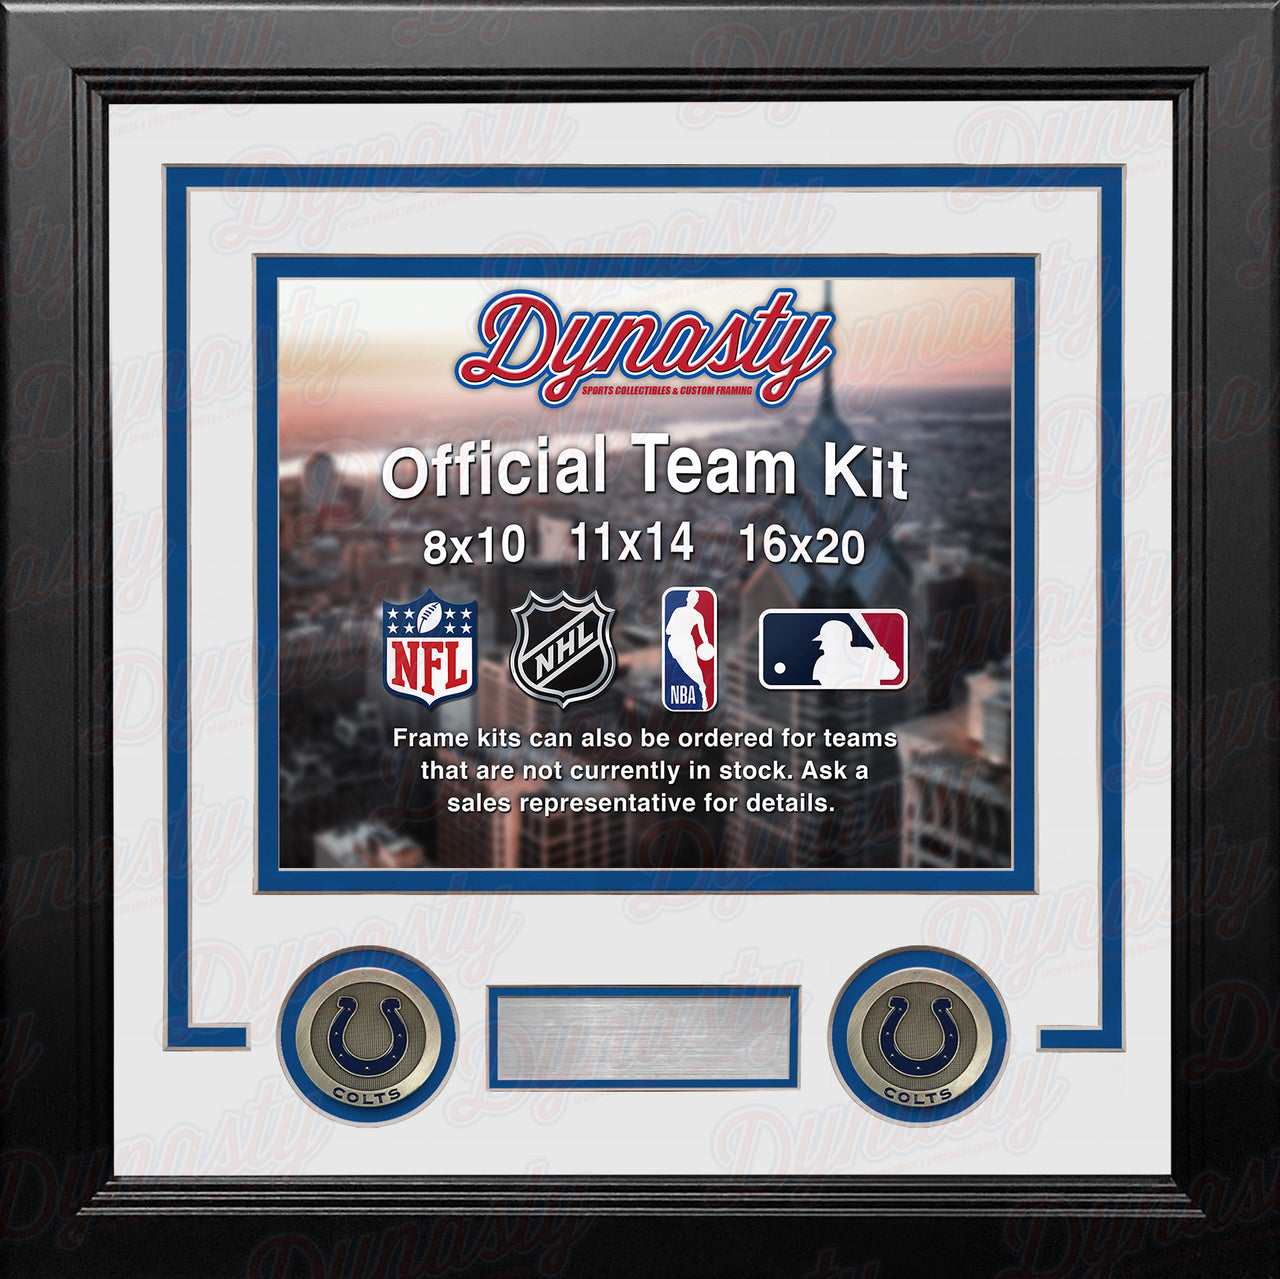 NFL Football Photo Picture Frame Kit - Indianapolis Colts (White Matting, Blue Trim) - Dynasty Sports & Framing 